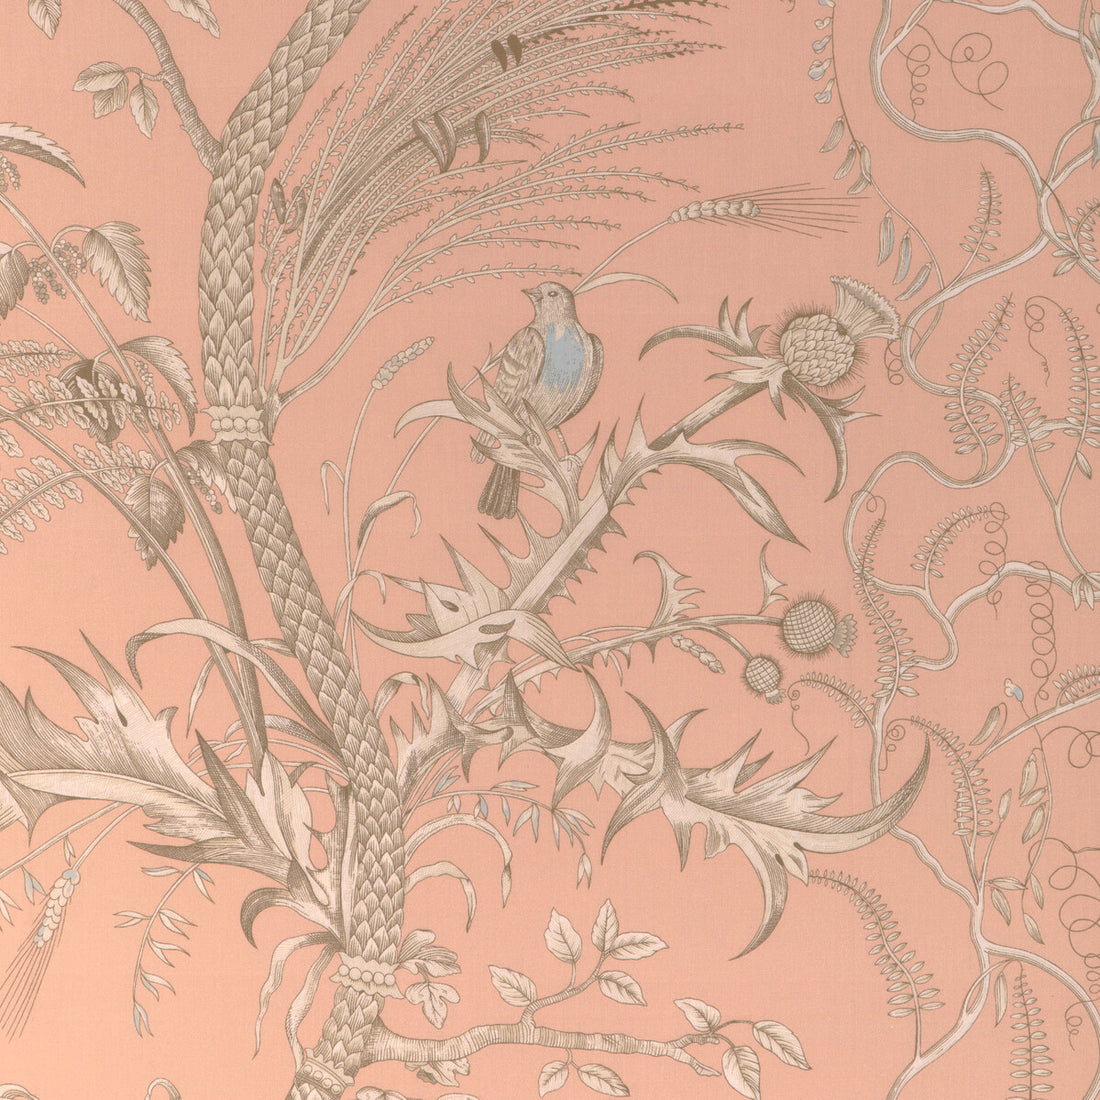 Bird And Thistle II fabric in peach color - pattern 8024101.1216.0 - by Brunschwig &amp; Fils in the La Menagerie collection